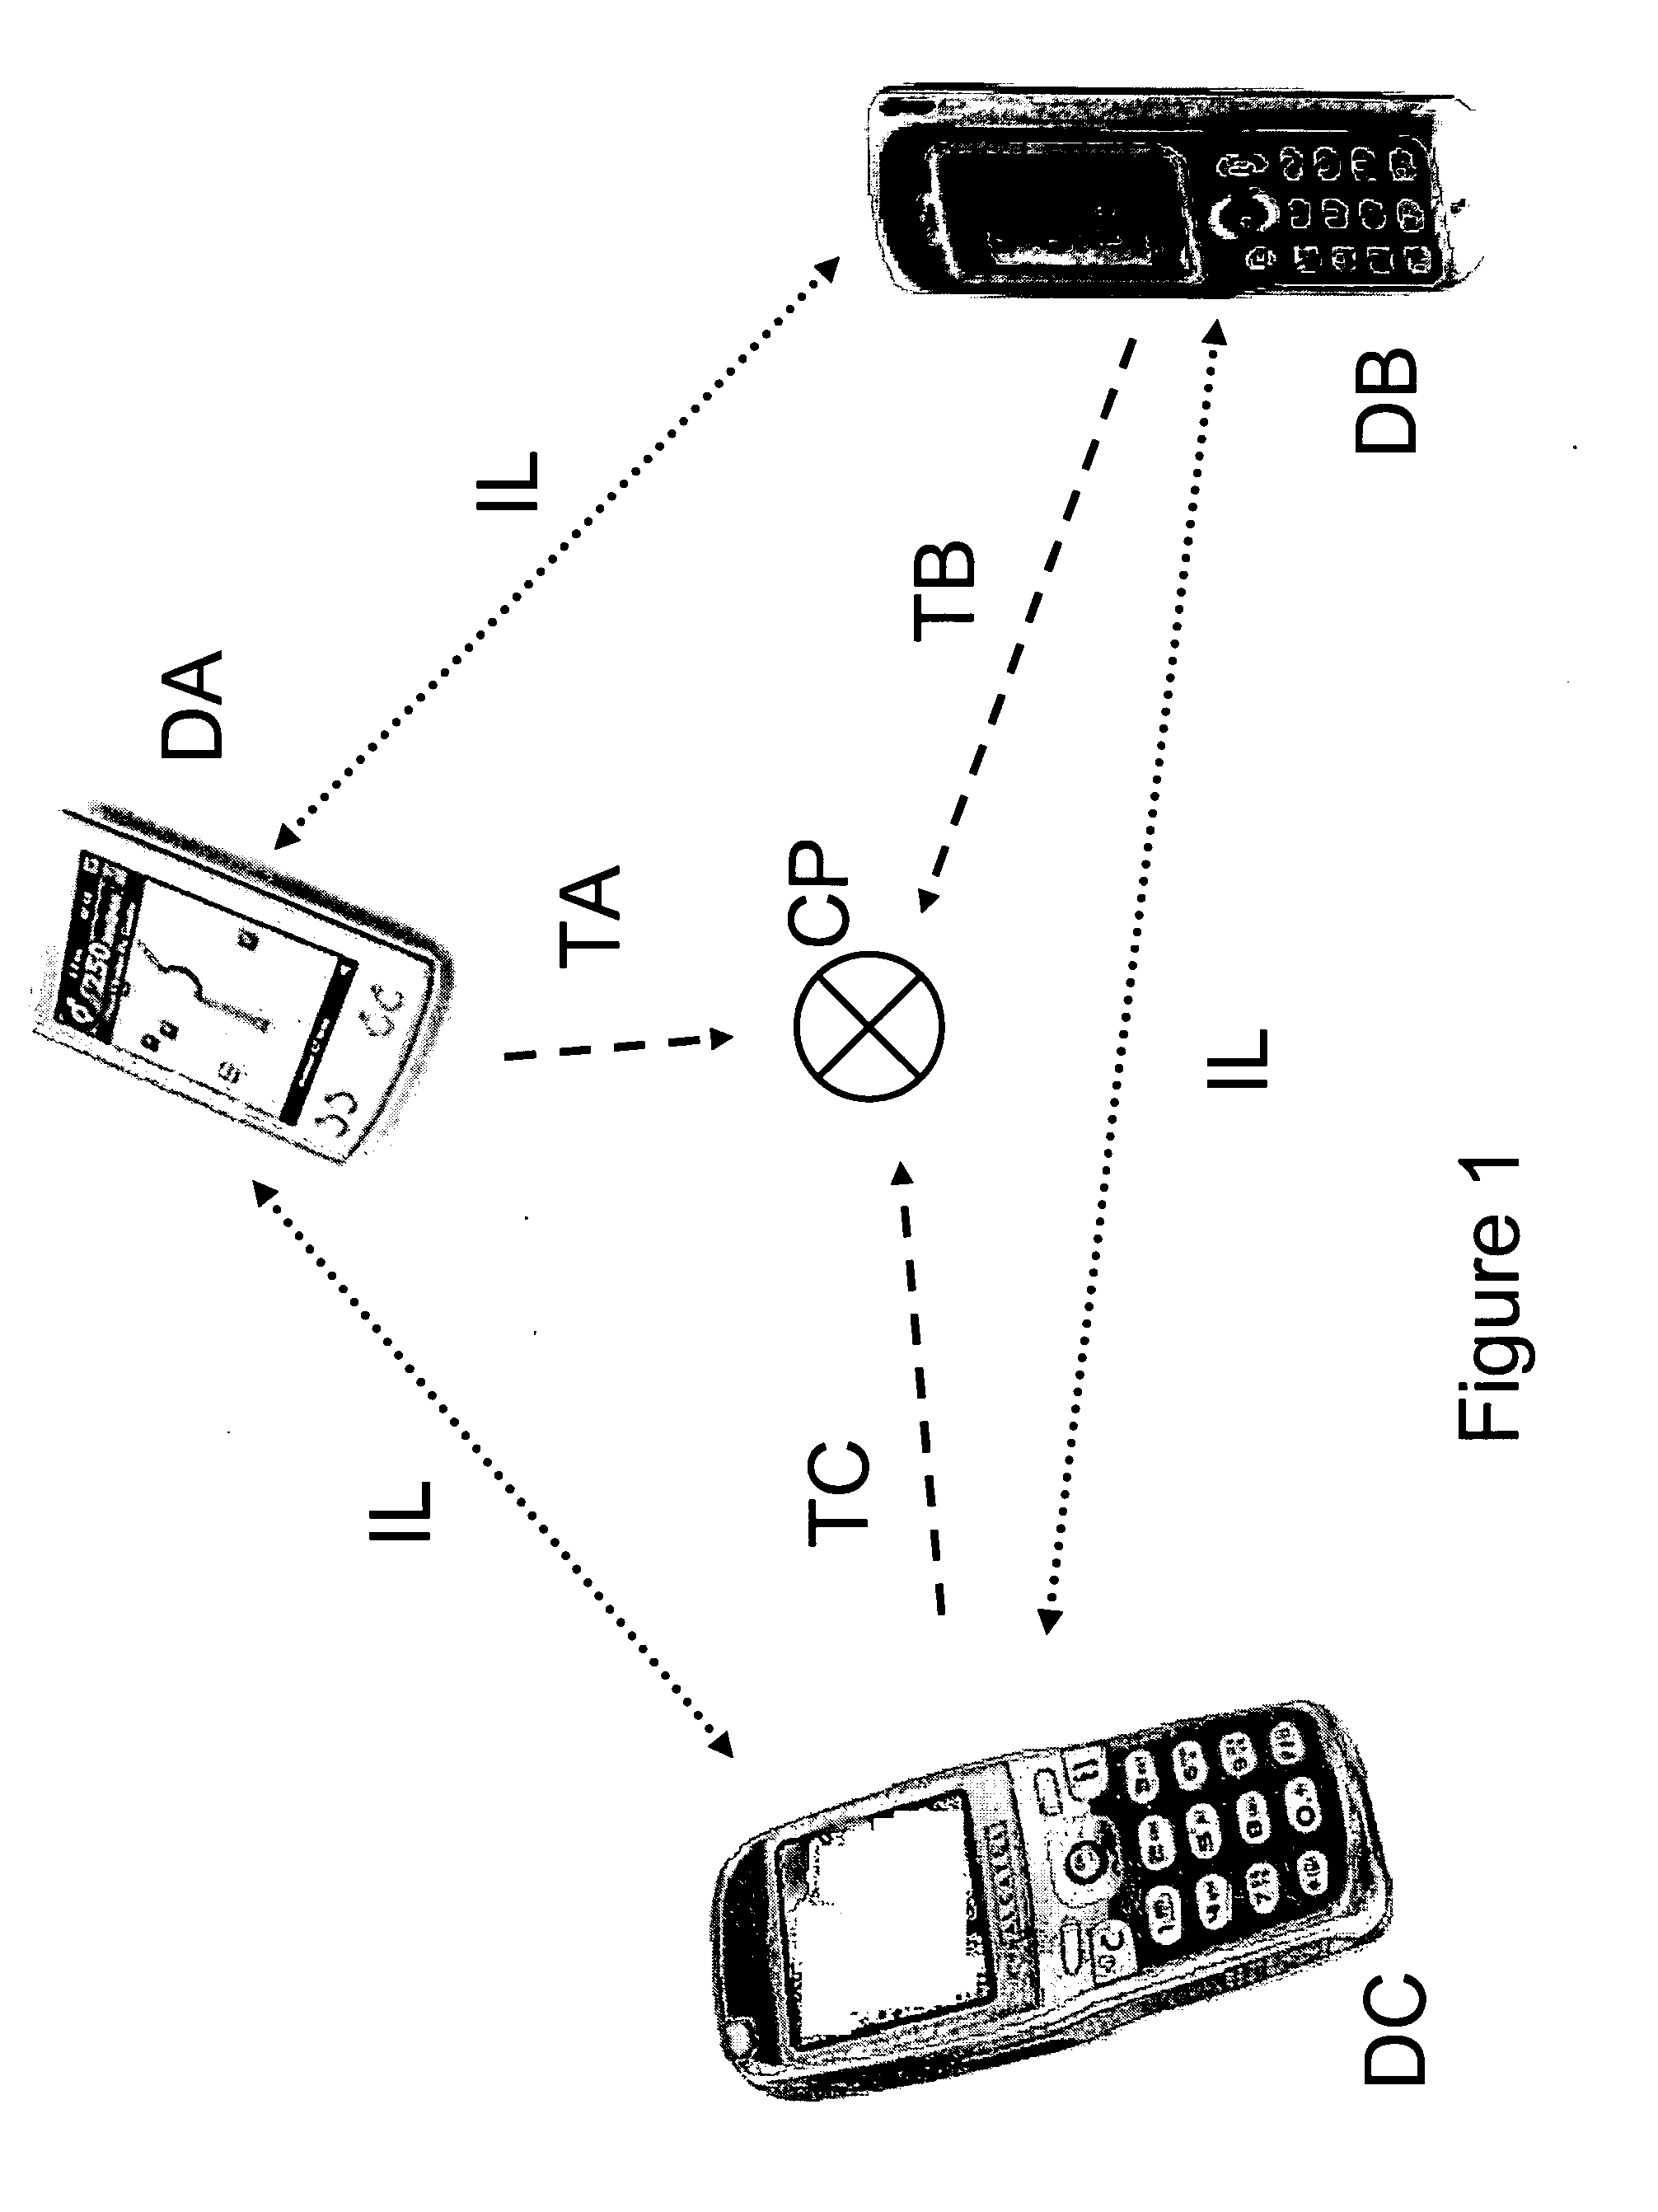 Method for providing a location-based appointment service